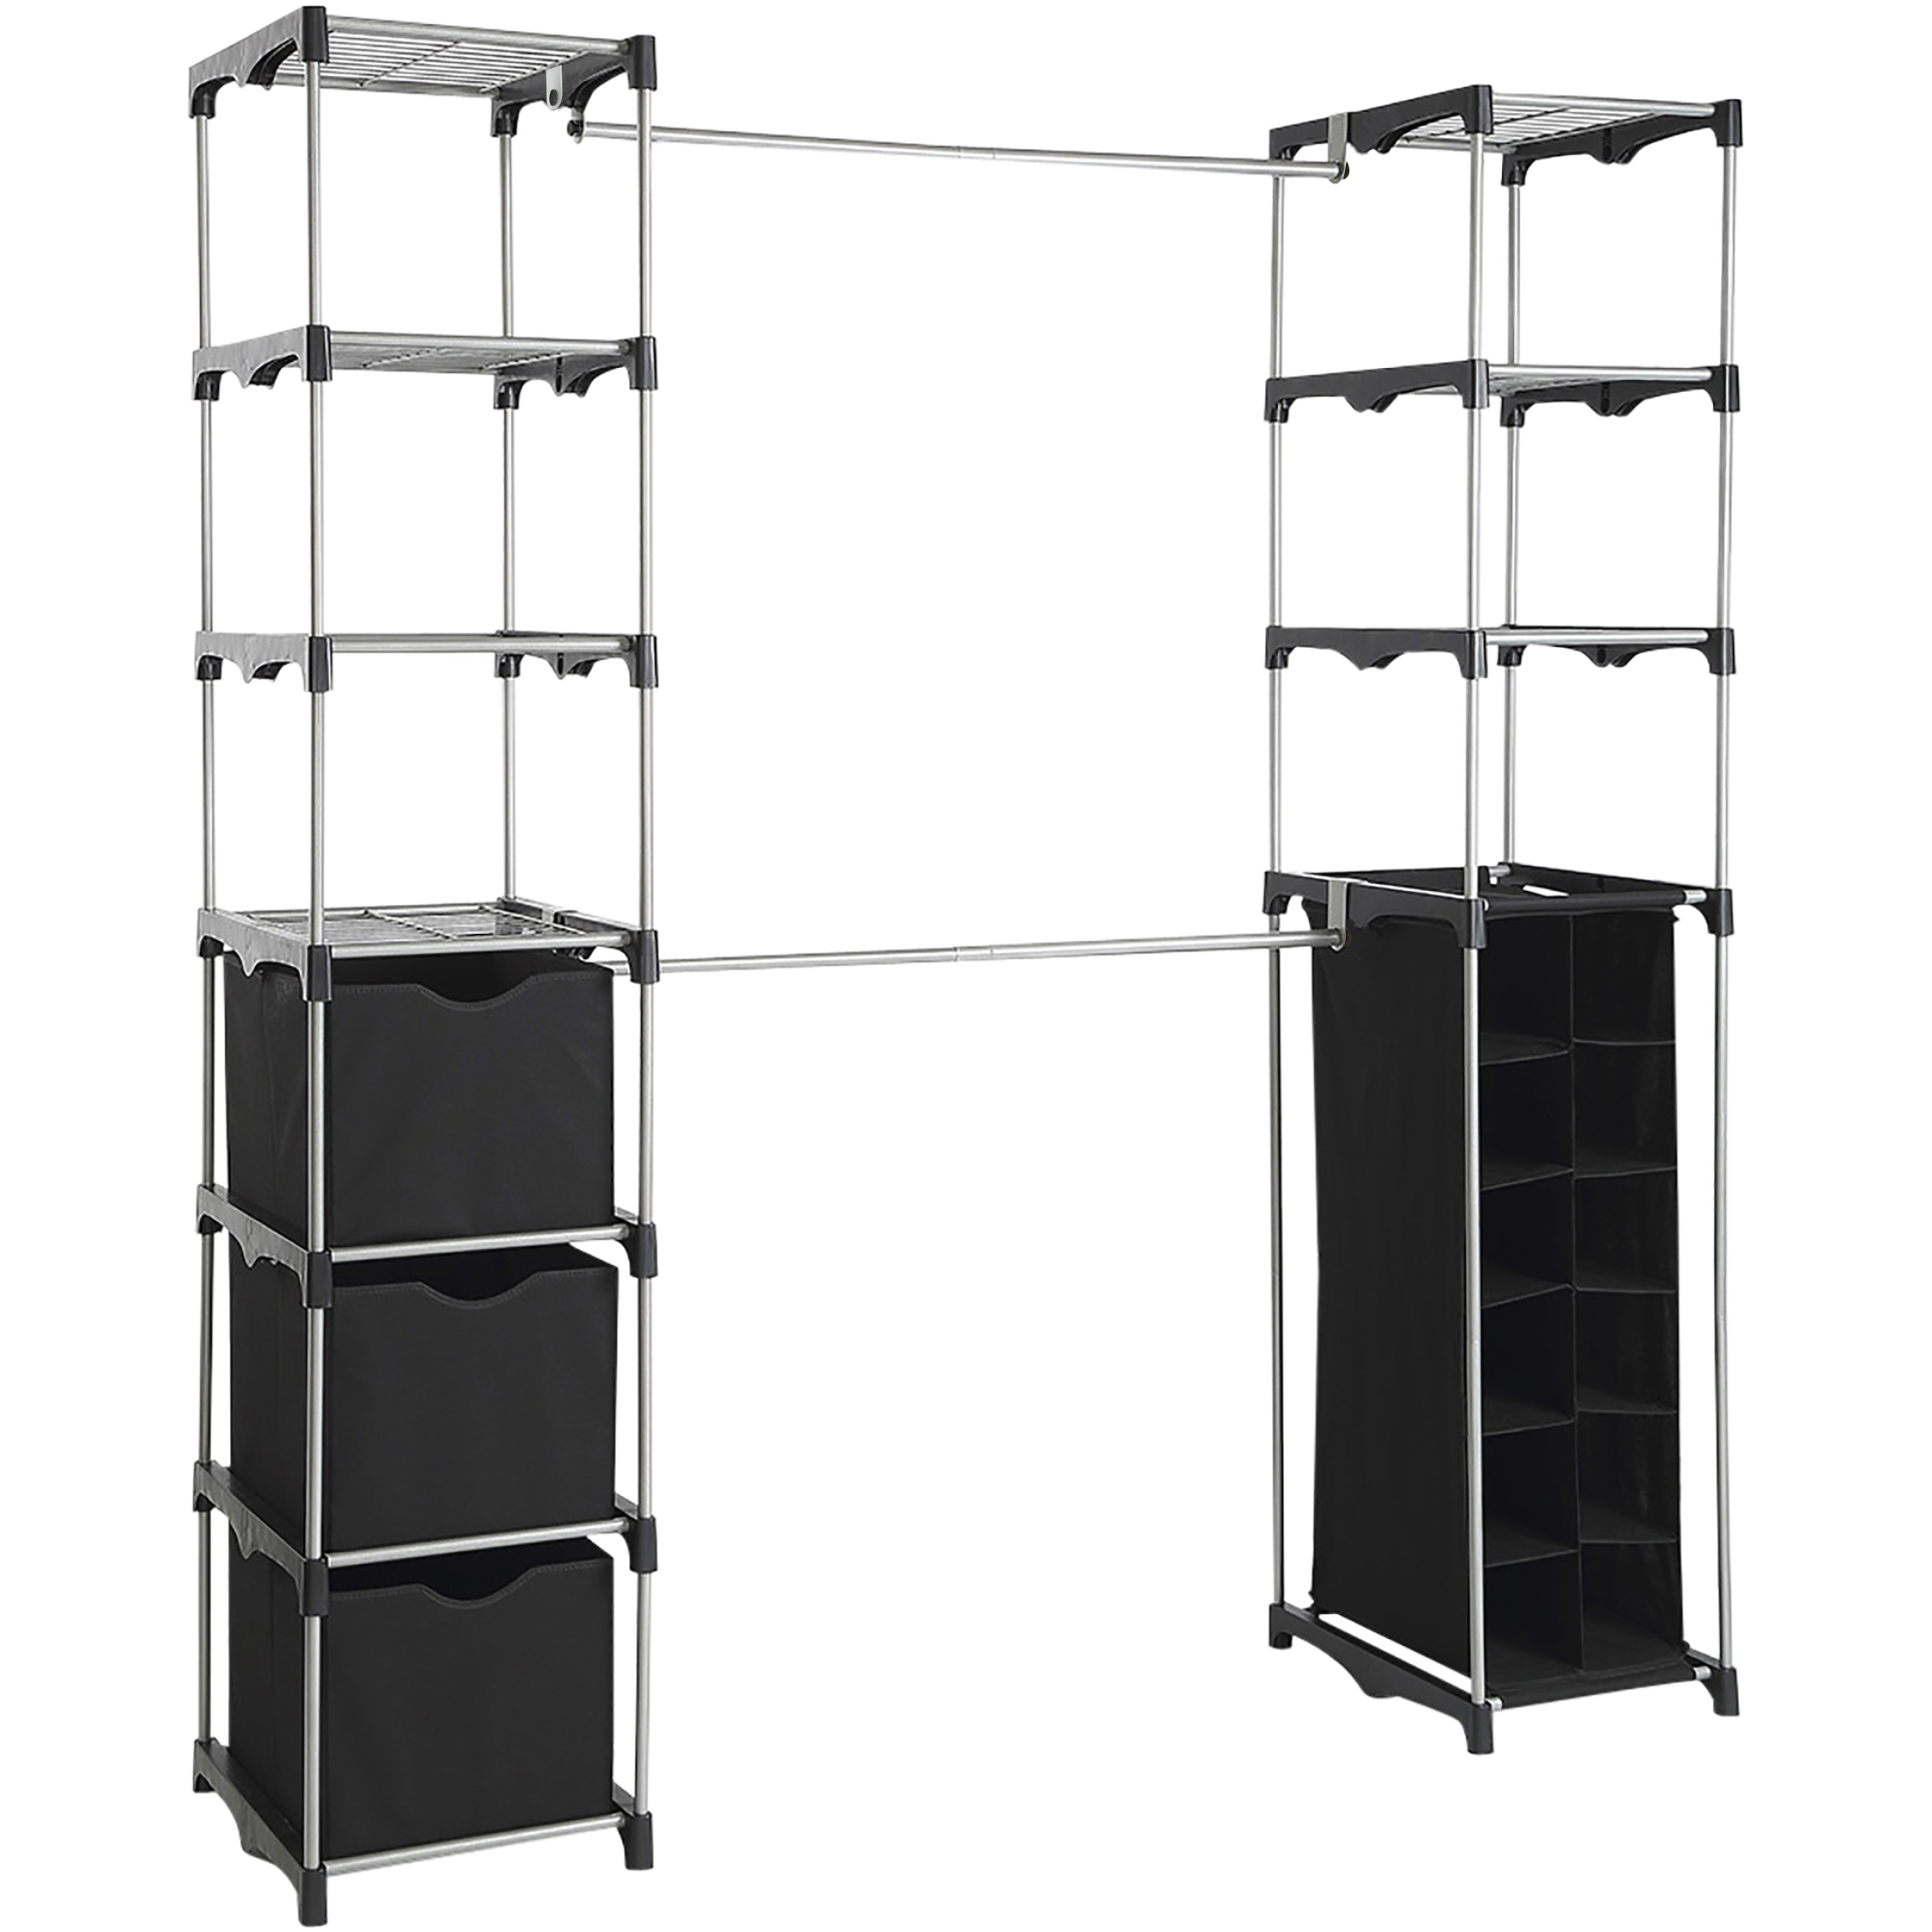 Mainstays  Non-Woven Closet Organizer, 2-Tower 9-Shelves, Easy to Assemble, Black - image 4 of 6